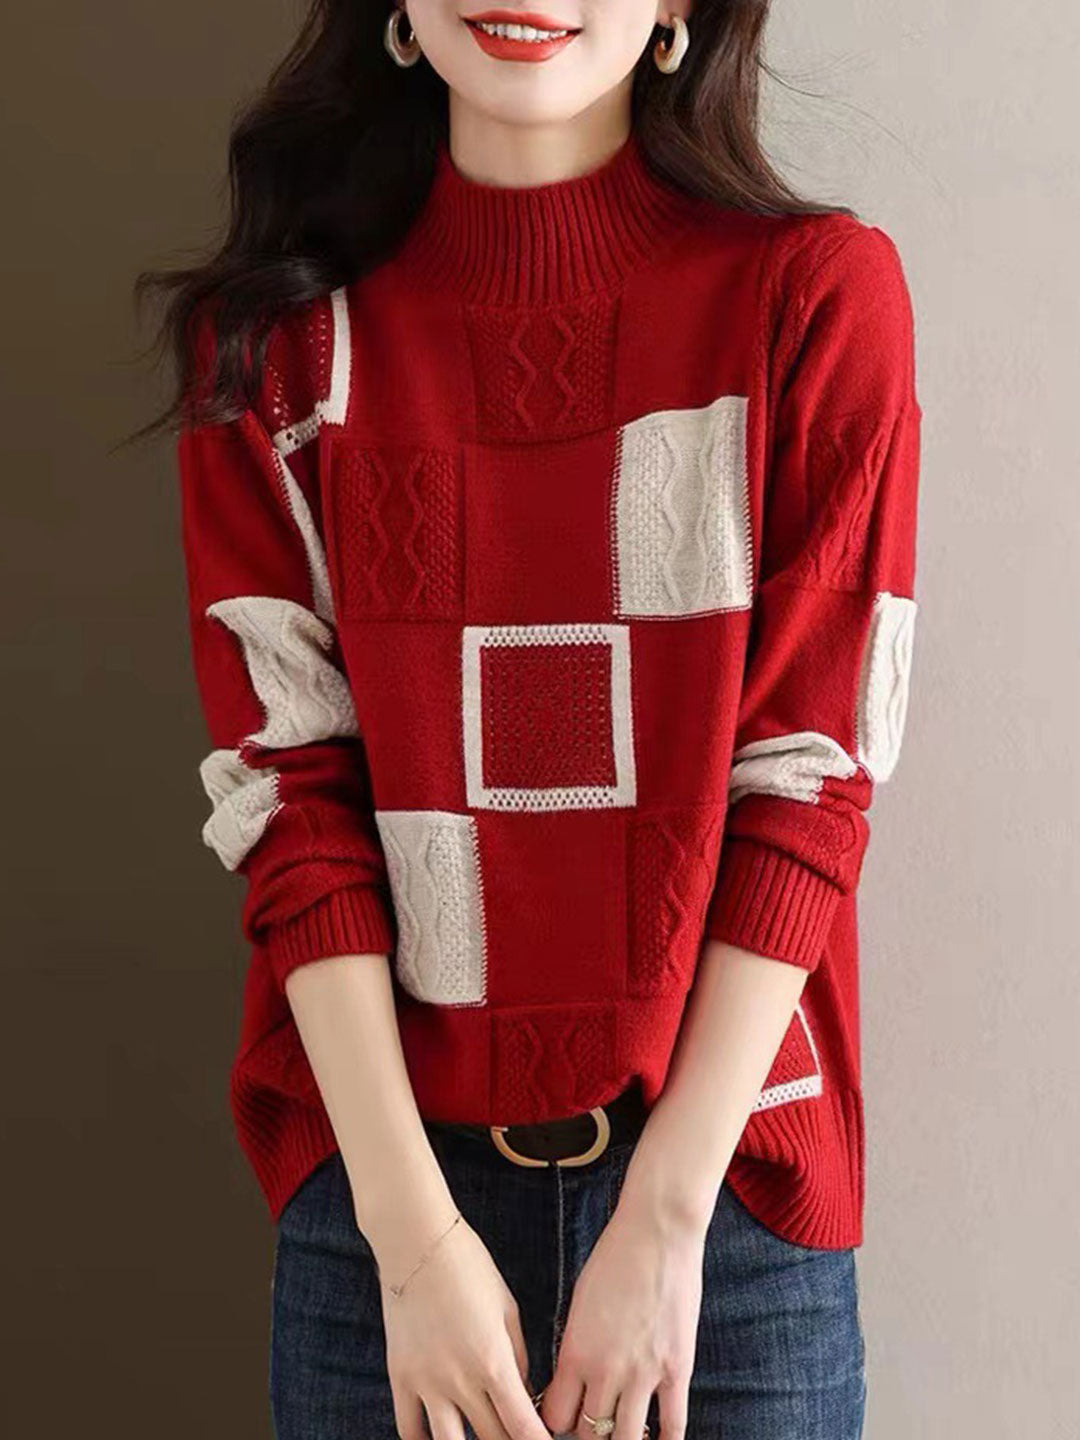 Lily Classic Turtleneck Contrast Knitted Sweater